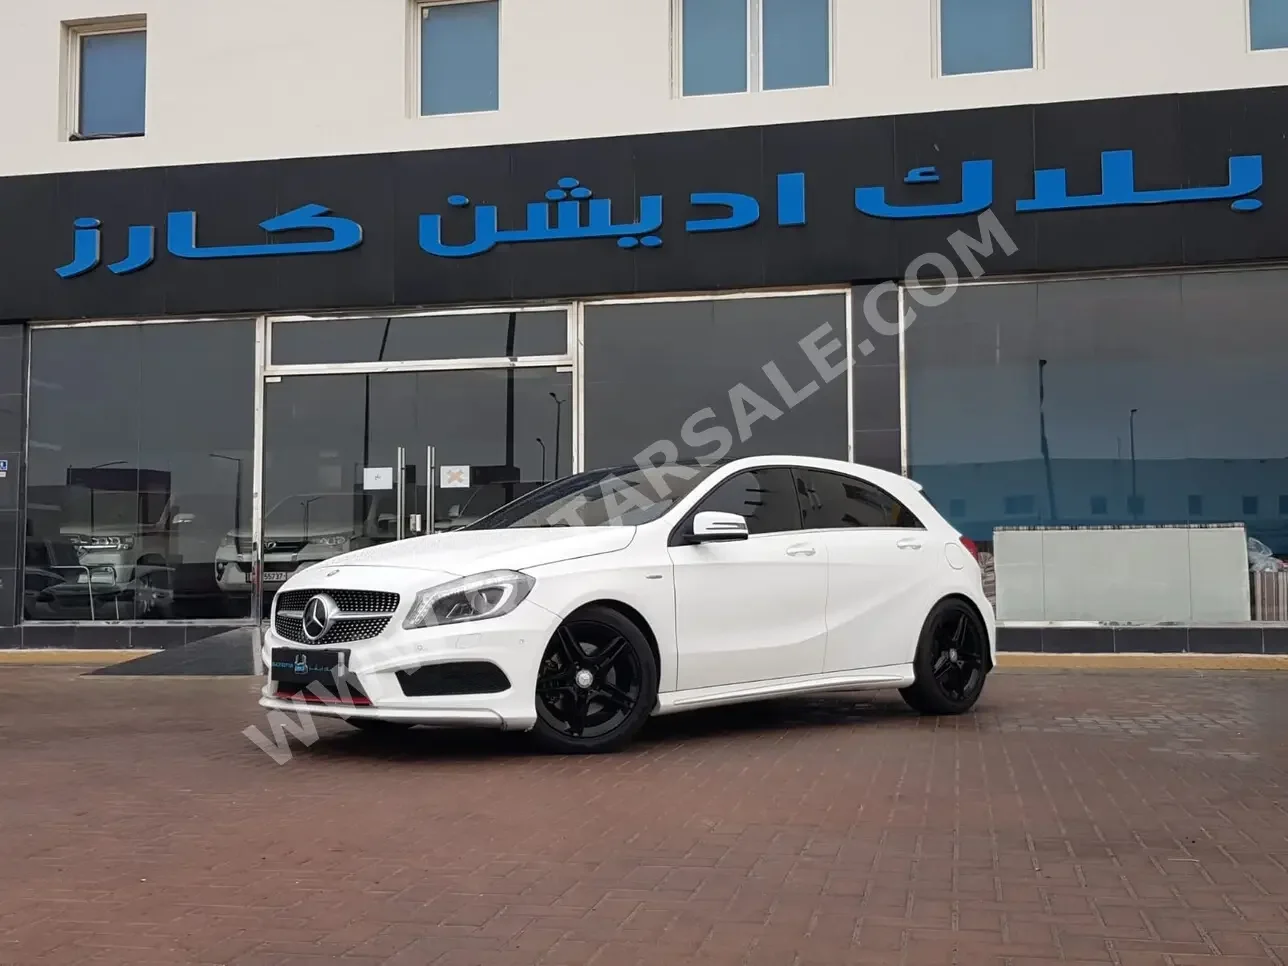 Mercedes-Benz  A-Class  250  2014  Automatic  93,000 Km  4 Cylinder  Rear Wheel Drive (RWD)  Hatchback  White